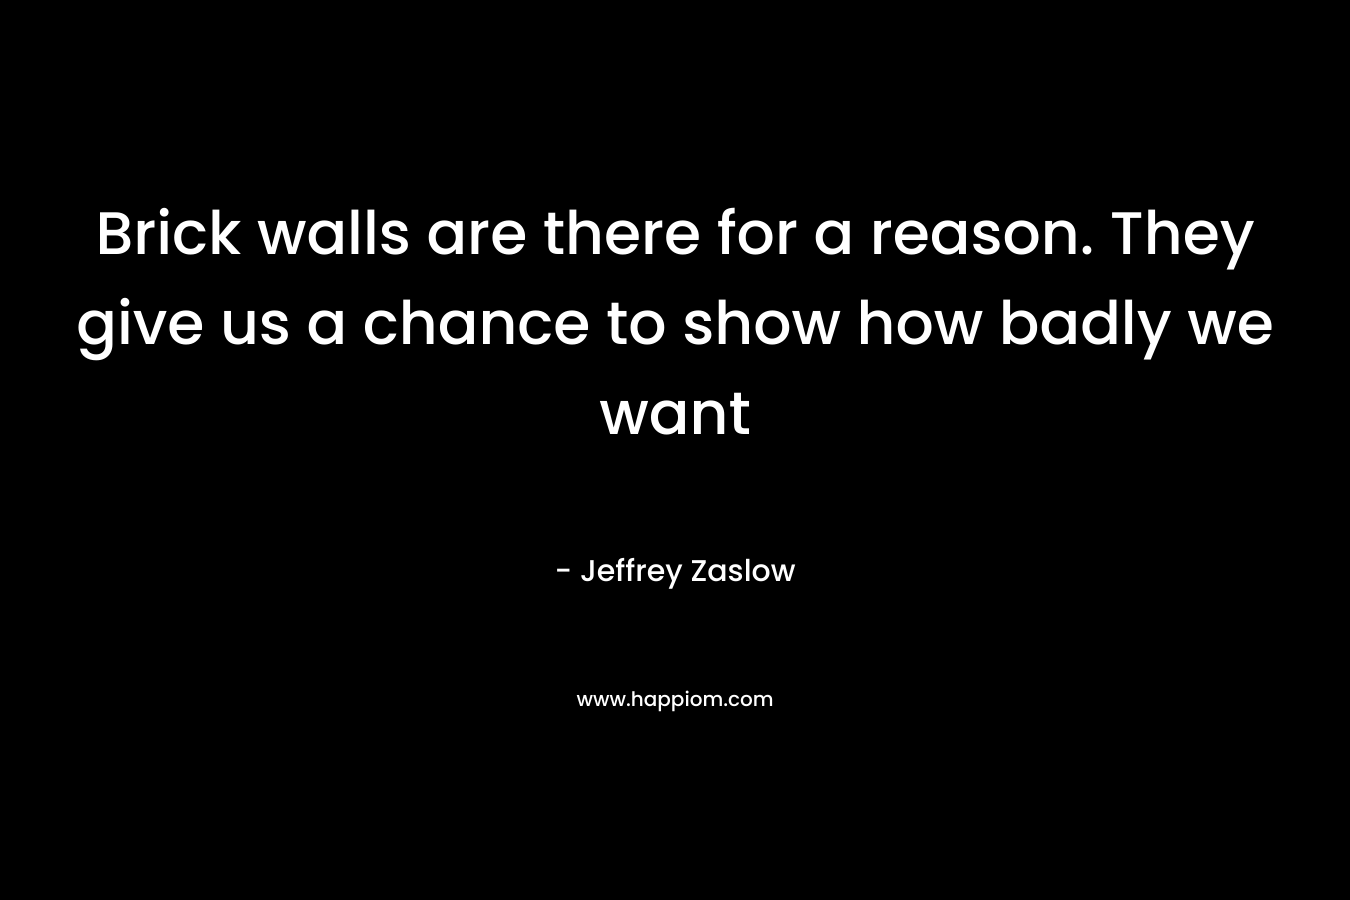 Brick walls are there for a reason. They give us a chance to show how badly we want – Jeffrey Zaslow